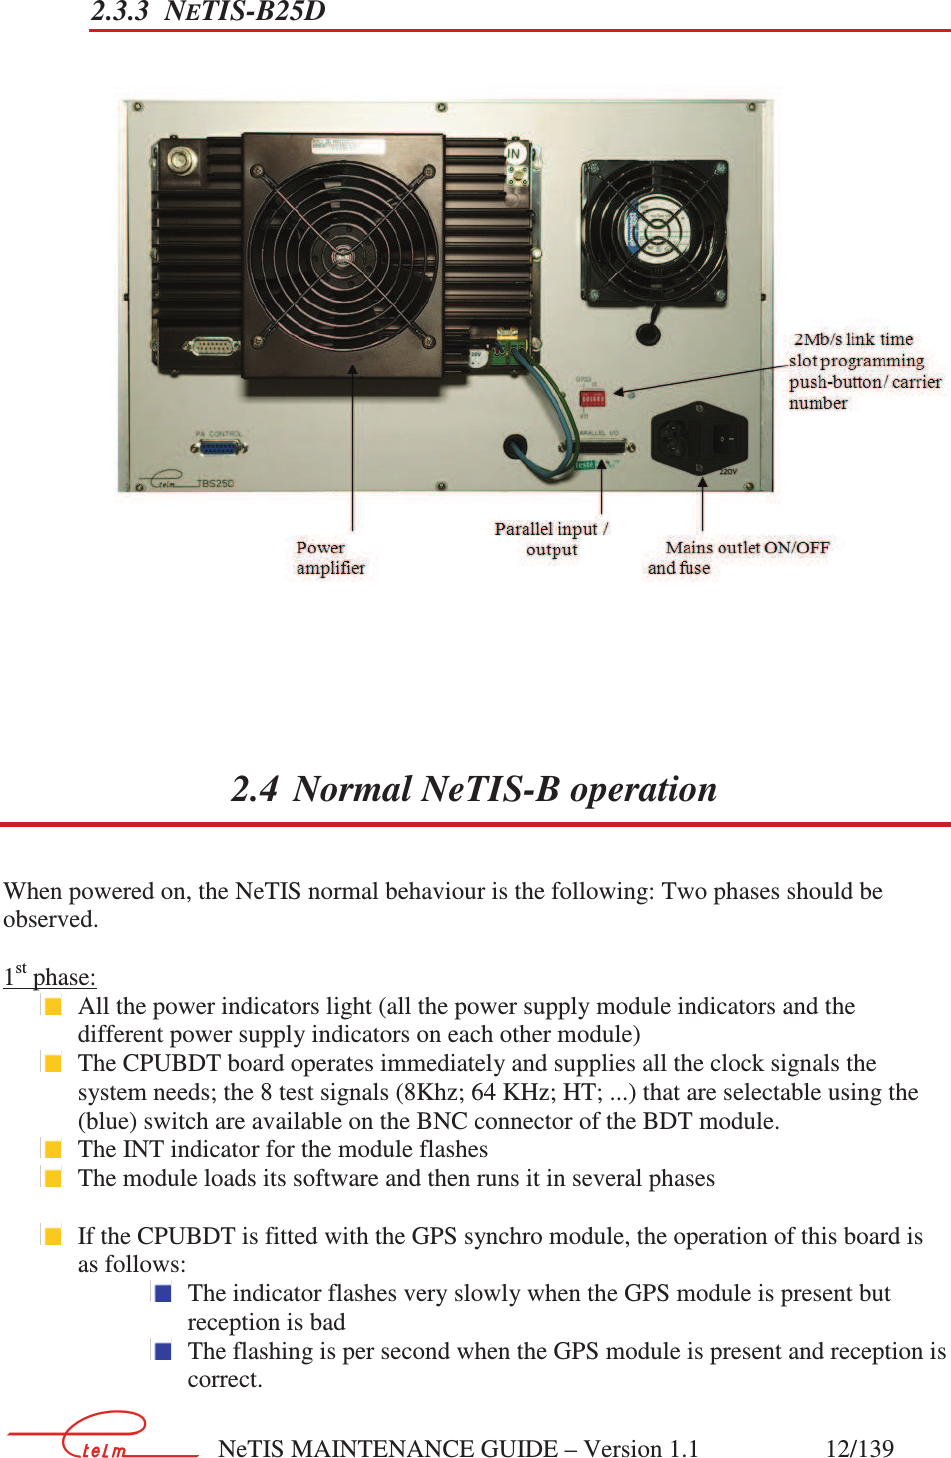        NeTIS MAINTENANCE GUIDE – Version 1.1                    12/139   2.3.3 NETIS-B25D       2.4 Normal NeTIS-B operation When powered on, the NeTIS normal behaviour is the following: Two phases should be observed.  1st phase:  All the power indicators light (all the power supply module indicators and the different power supply indicators on each other module)  The CPUBDT board operates immediately and supplies all the clock signals the system needs; the 8 test signals (8Khz; 64 KHz; HT; ...) that are selectable using the (blue) switch are available on the BNC connector of the BDT module.  The INT indicator for the module flashes   The module loads its software and then runs it in several phases   If the CPUBDT is fitted with the GPS synchro module, the operation of this board is as follows:    The indicator flashes very slowly when the GPS module is present but reception is bad  The flashing is per second when the GPS module is present and reception is correct.                                                                      